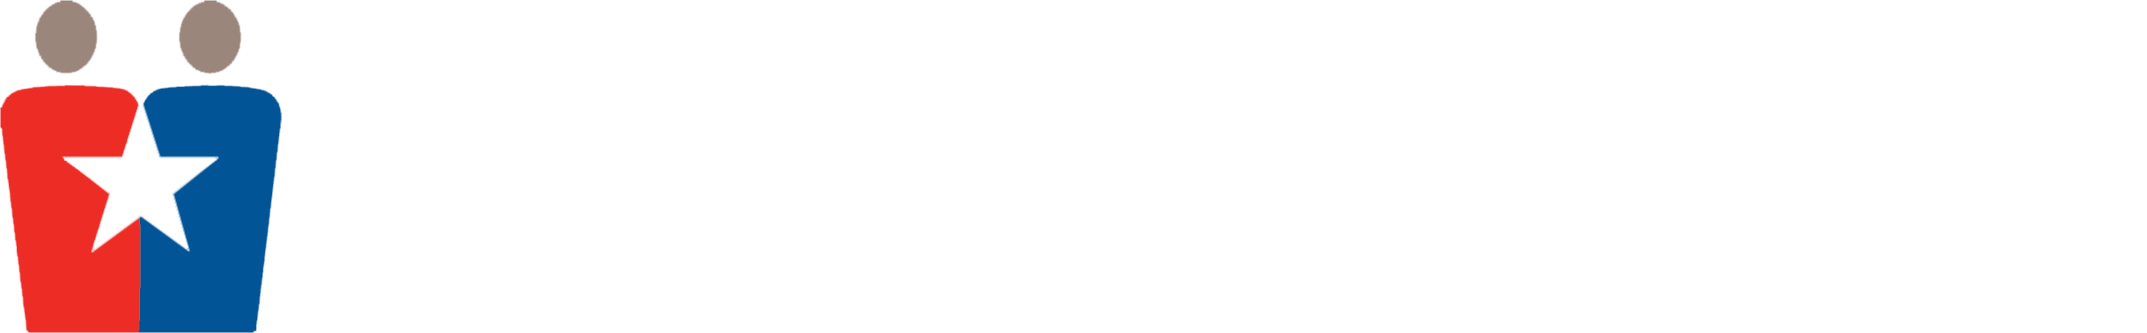 J. Robert Surface Attorney at Law